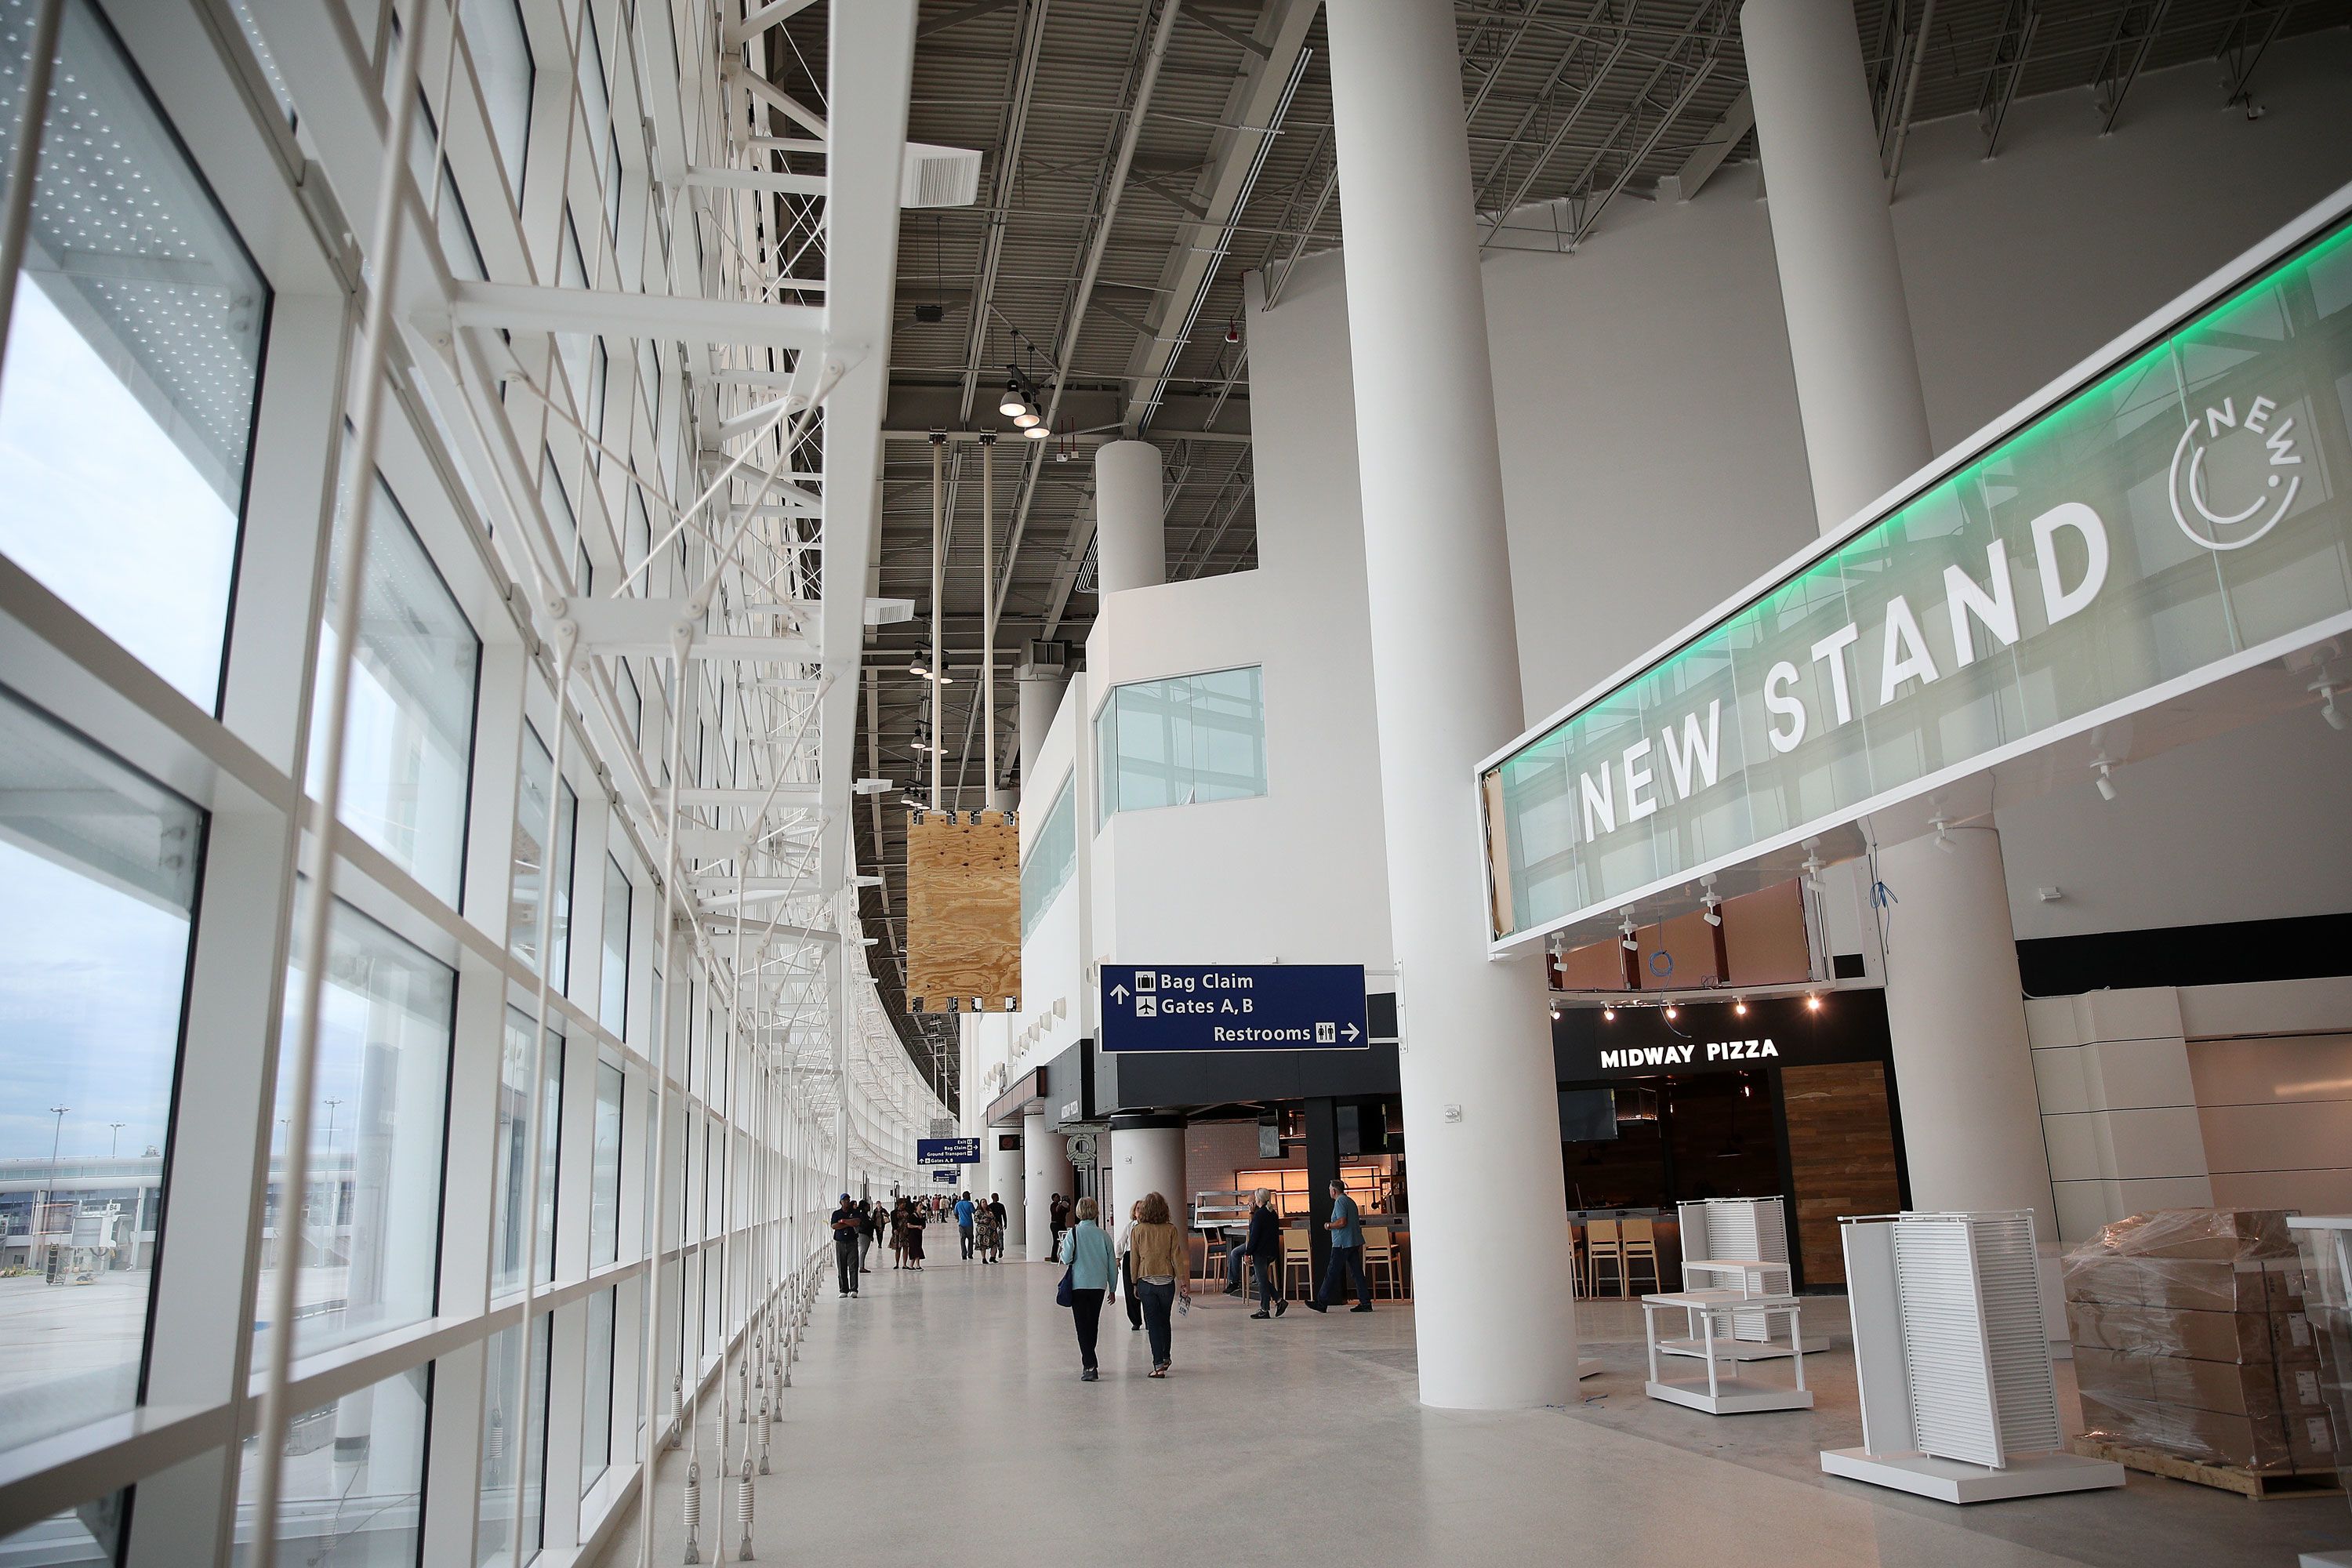 New Orleans Airport Breaks Ground on $807 Million Terminal, 2016-01-26, ENR